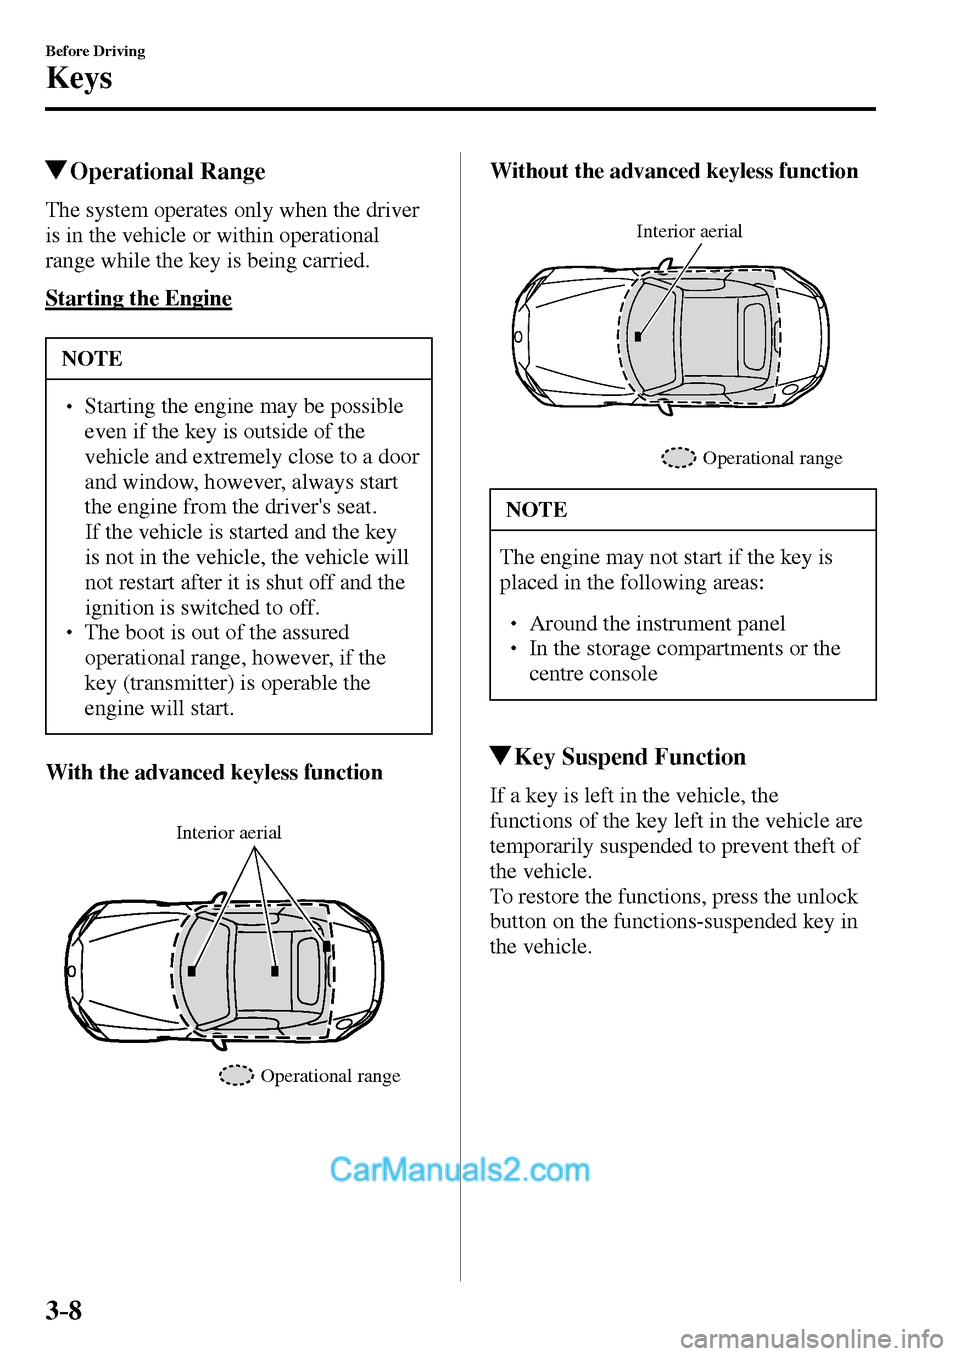 MAZDA MODEL MX-5 2017  Owners Manual - RHD (UK, Australia) (in English) 3–8
Before Driving
Keys
 Operational  Range
    The system operates only when the driver 
is in the vehicle or within operational 
range while the key is being carried.
  Starting  the  Engine
 NOTE